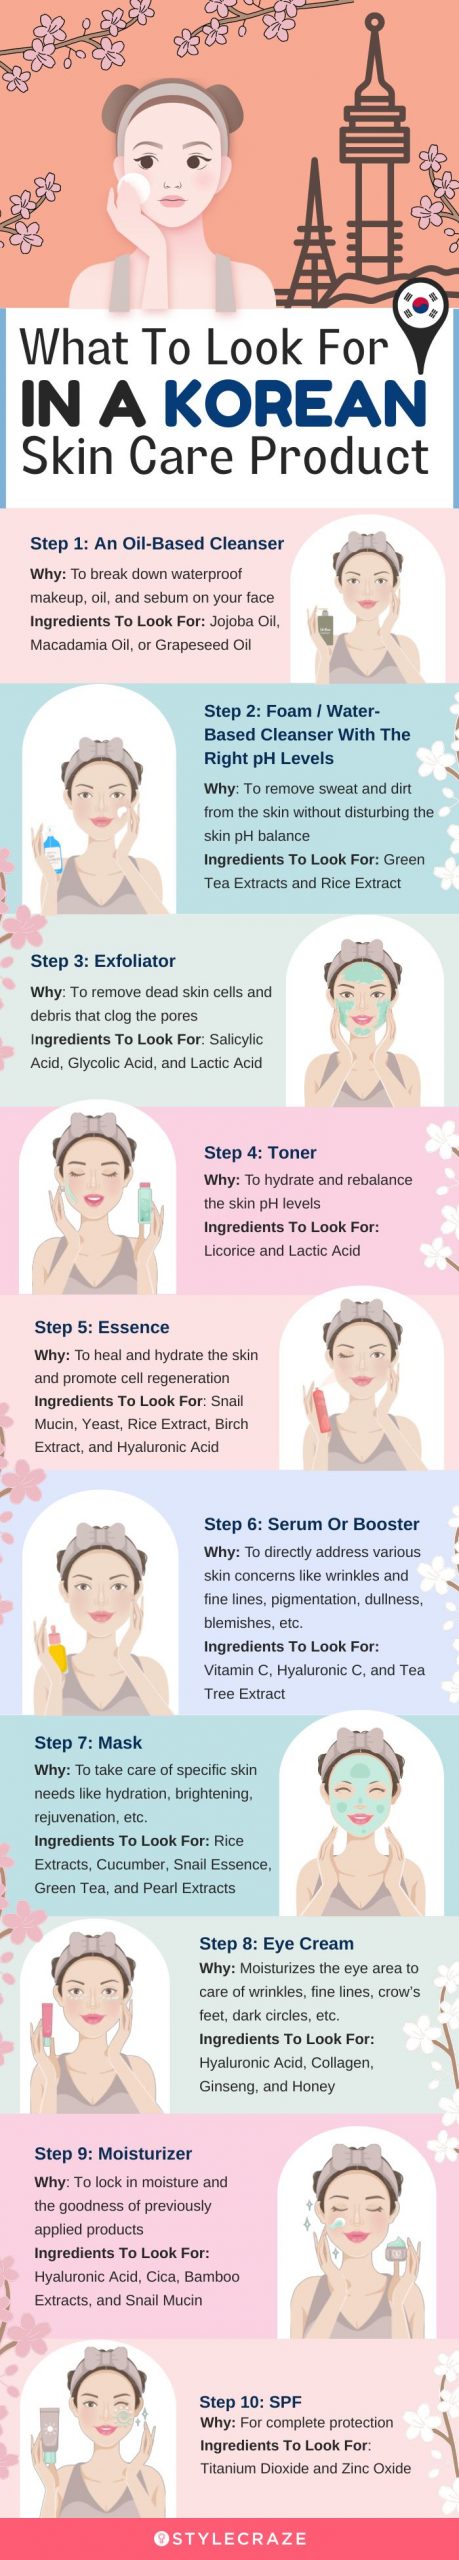 What To Look For In A Korean Skin Care Product [infographic]